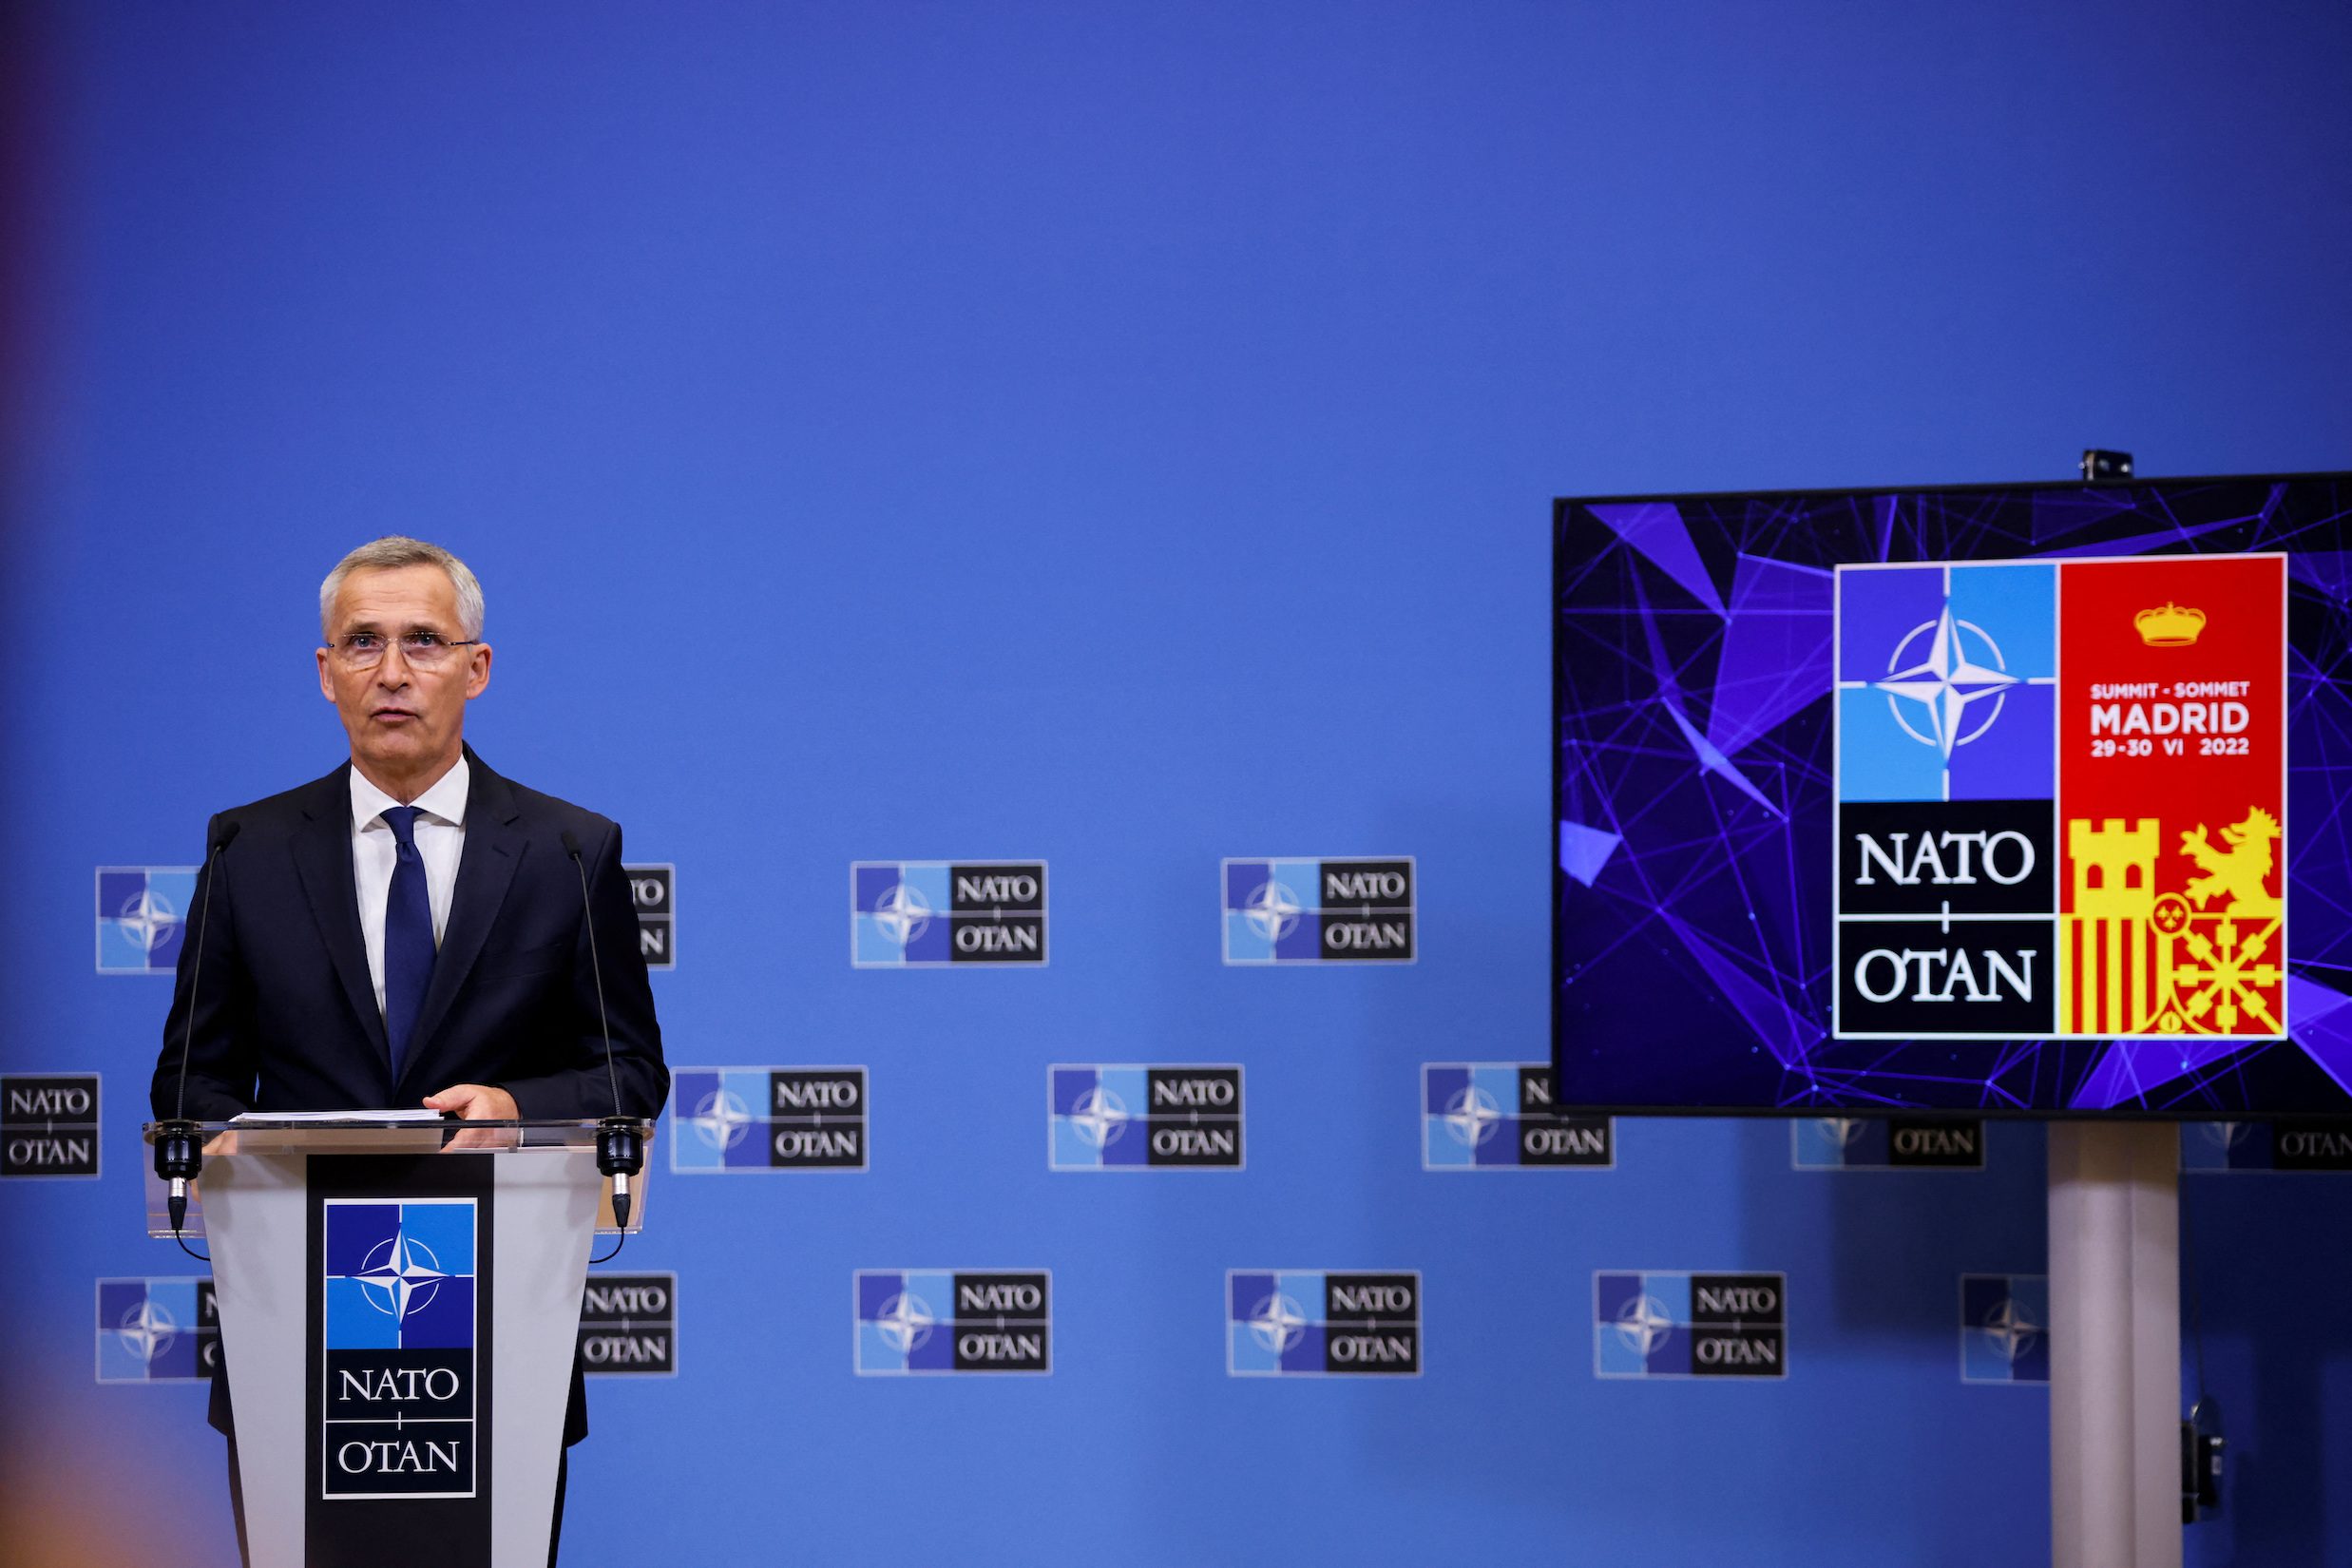 NATO to have over 300,000 troops at higher readiness – Stoltenberg